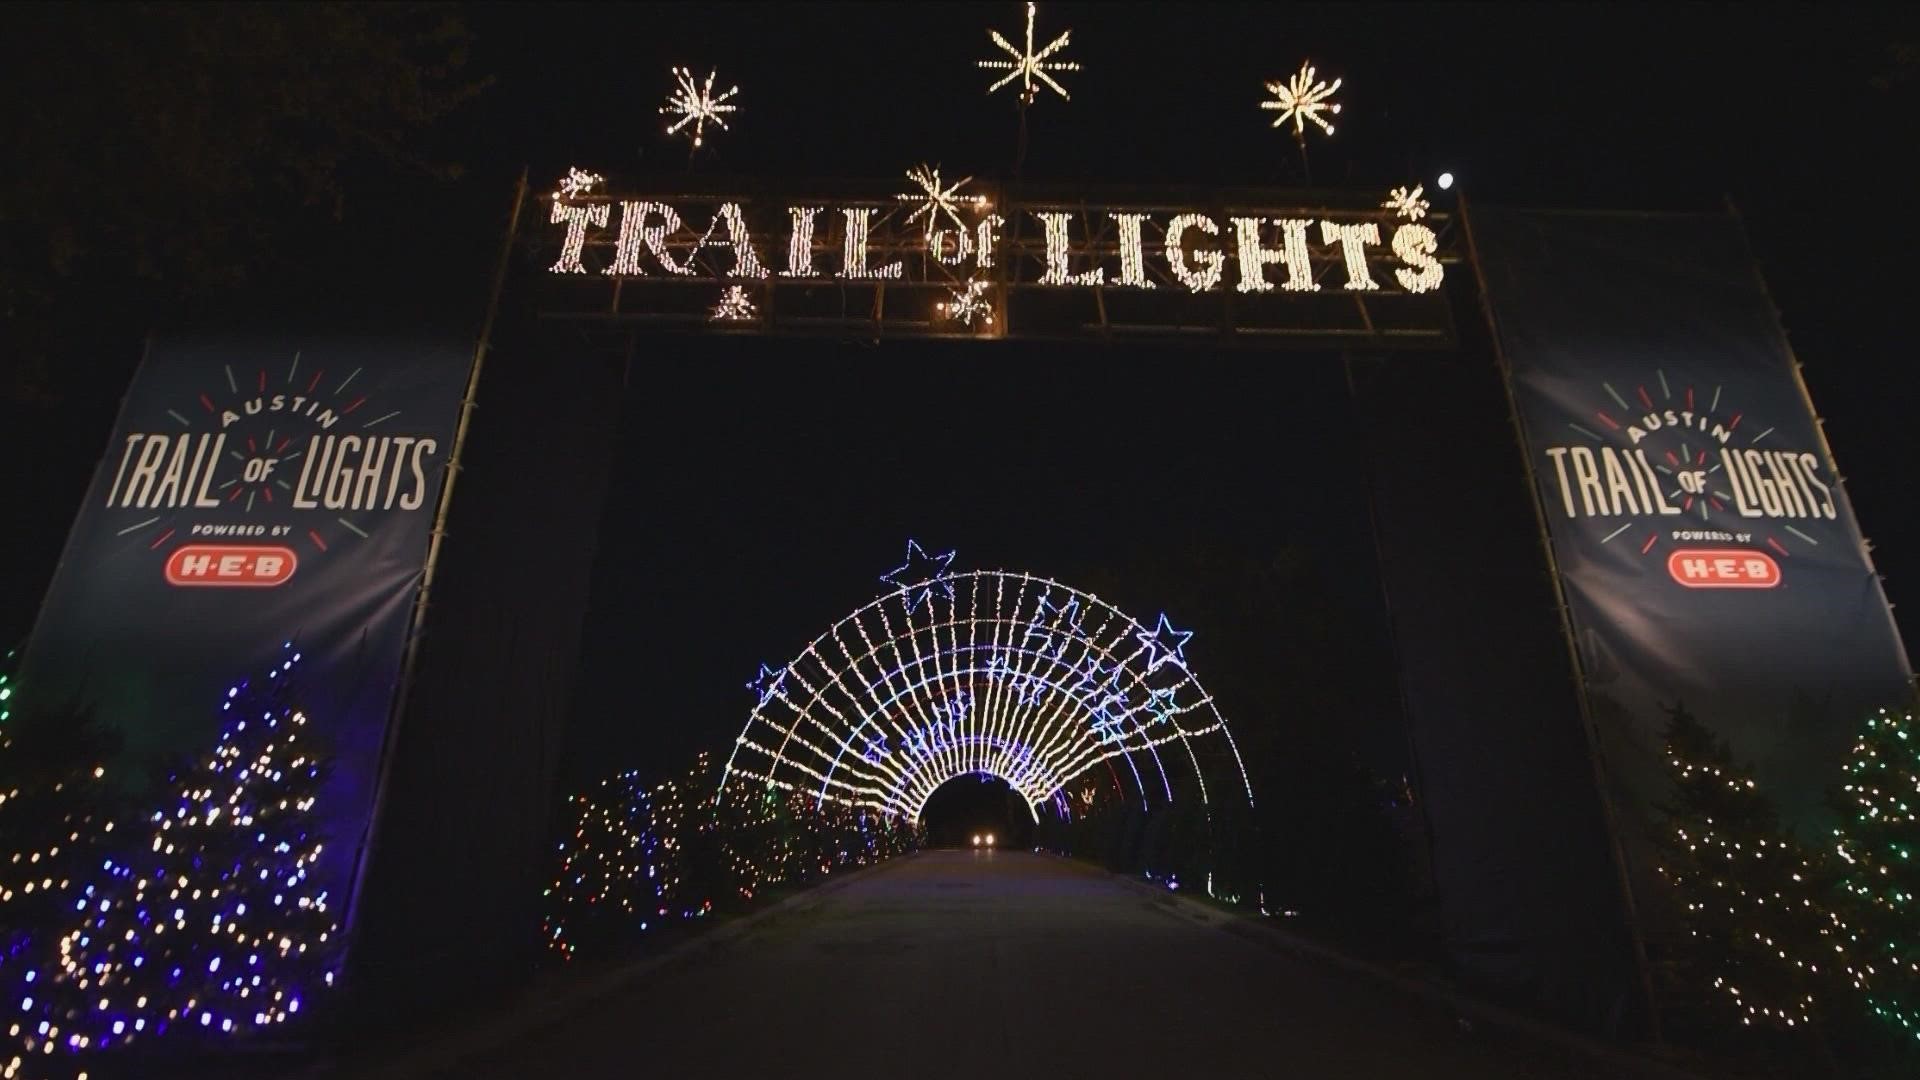 Organizers with Austin's Trail of Lights are closing on Thursday night due to the cold weather.